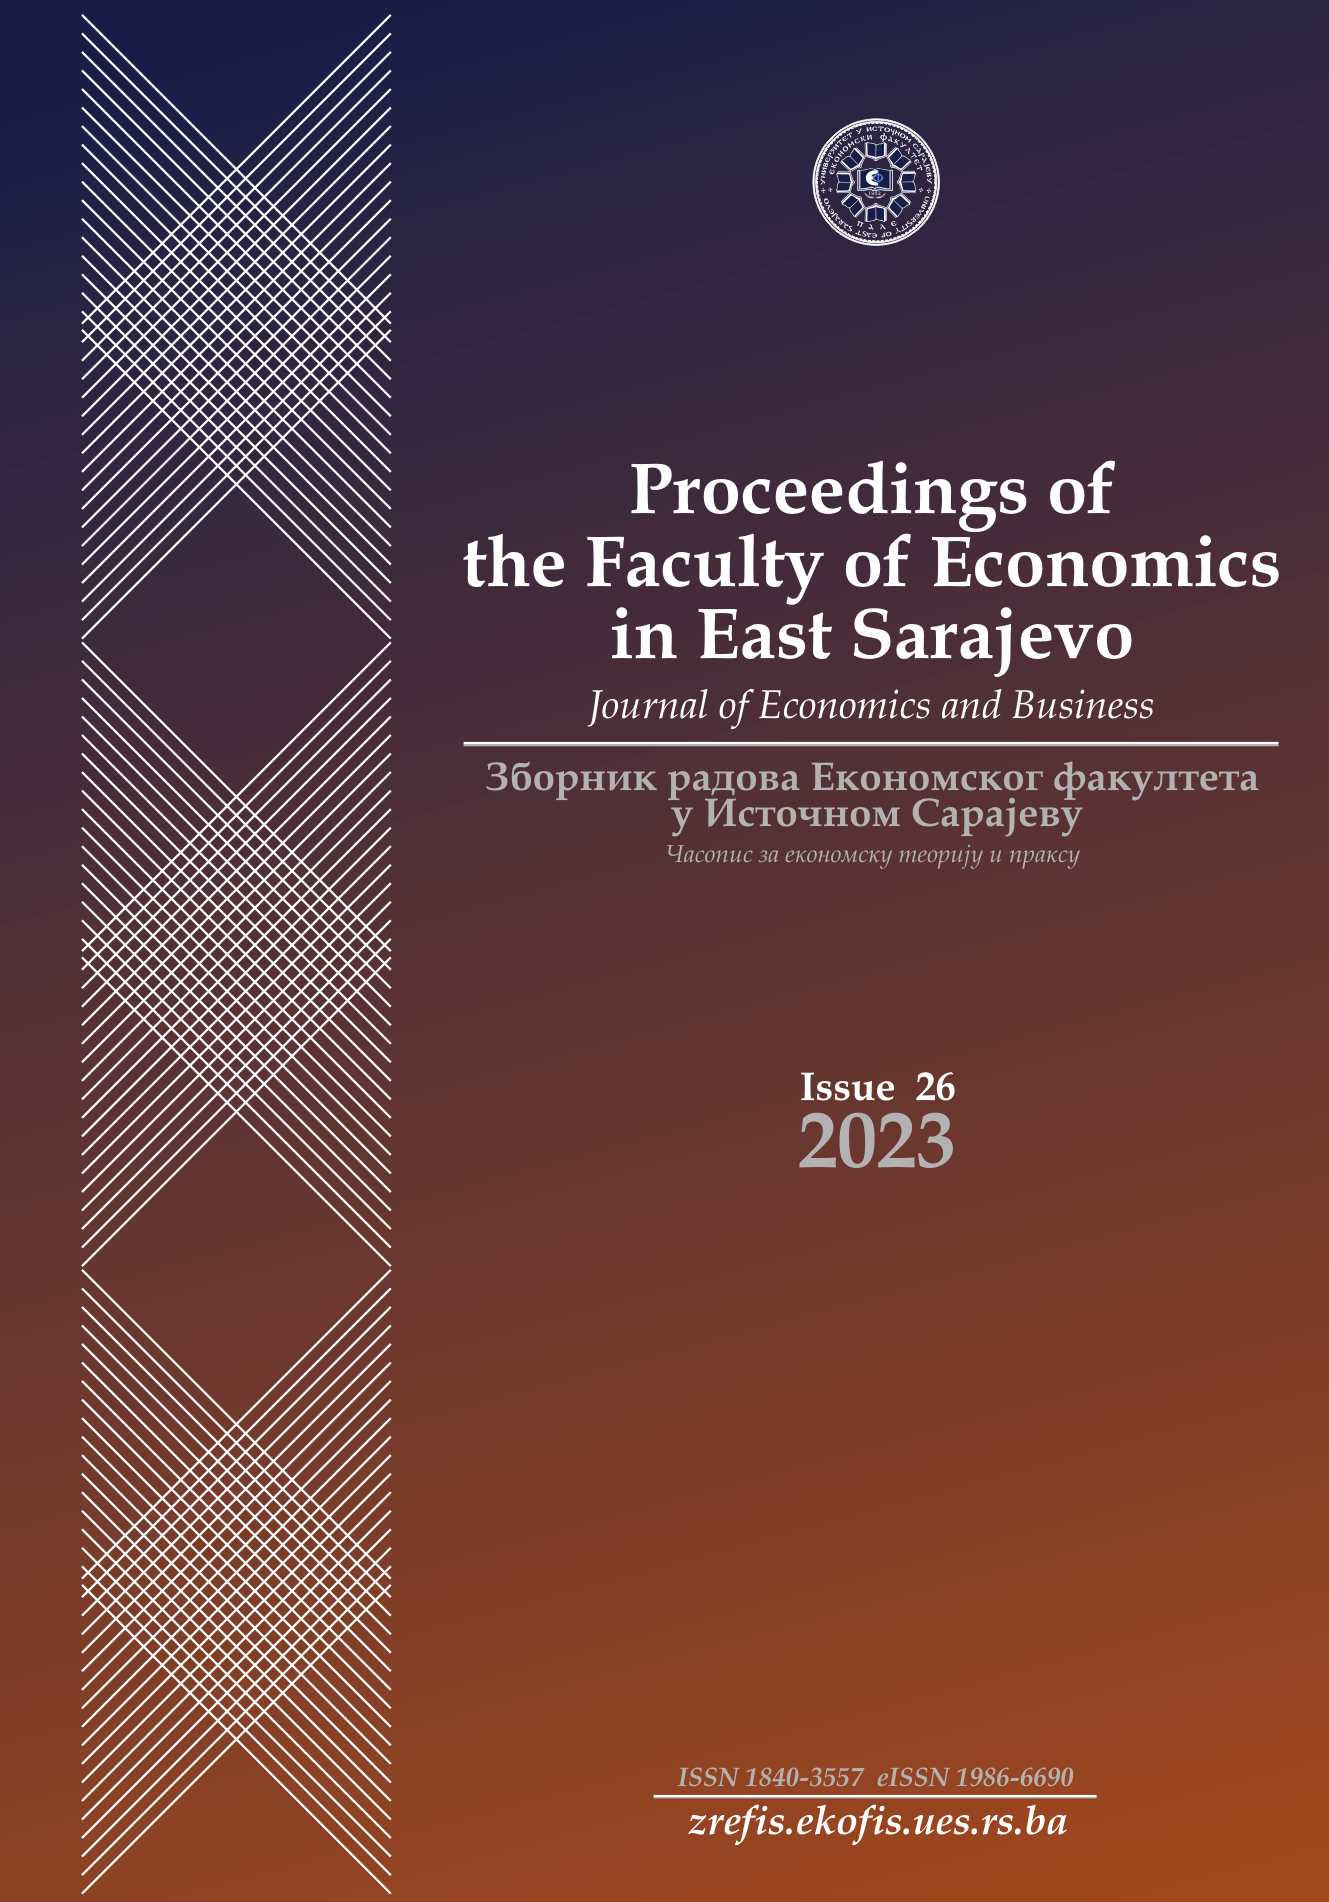 THE EFFECT OF CAPITAL EXPENDITURE IN THE FORM OF FIXED ASSETS ON ECONOMIC GROWTH IN THE REPUBLIC OF SERBIA